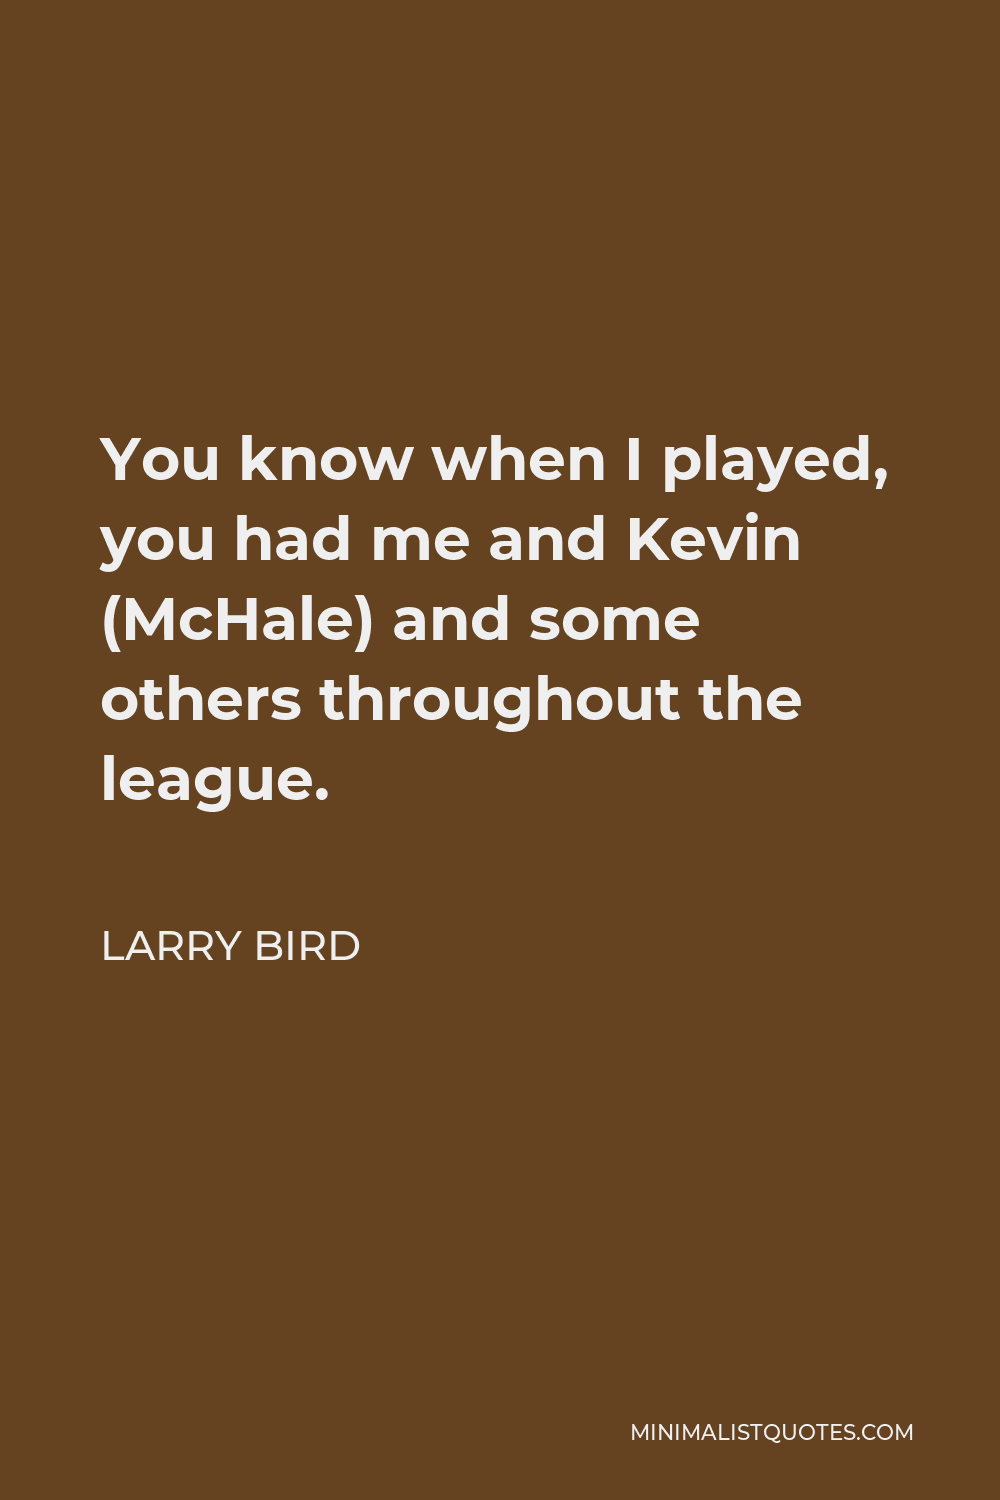 Larry Bird Quote - You know when I played, you had me and Kevin (McHale) and some others throughout the league.